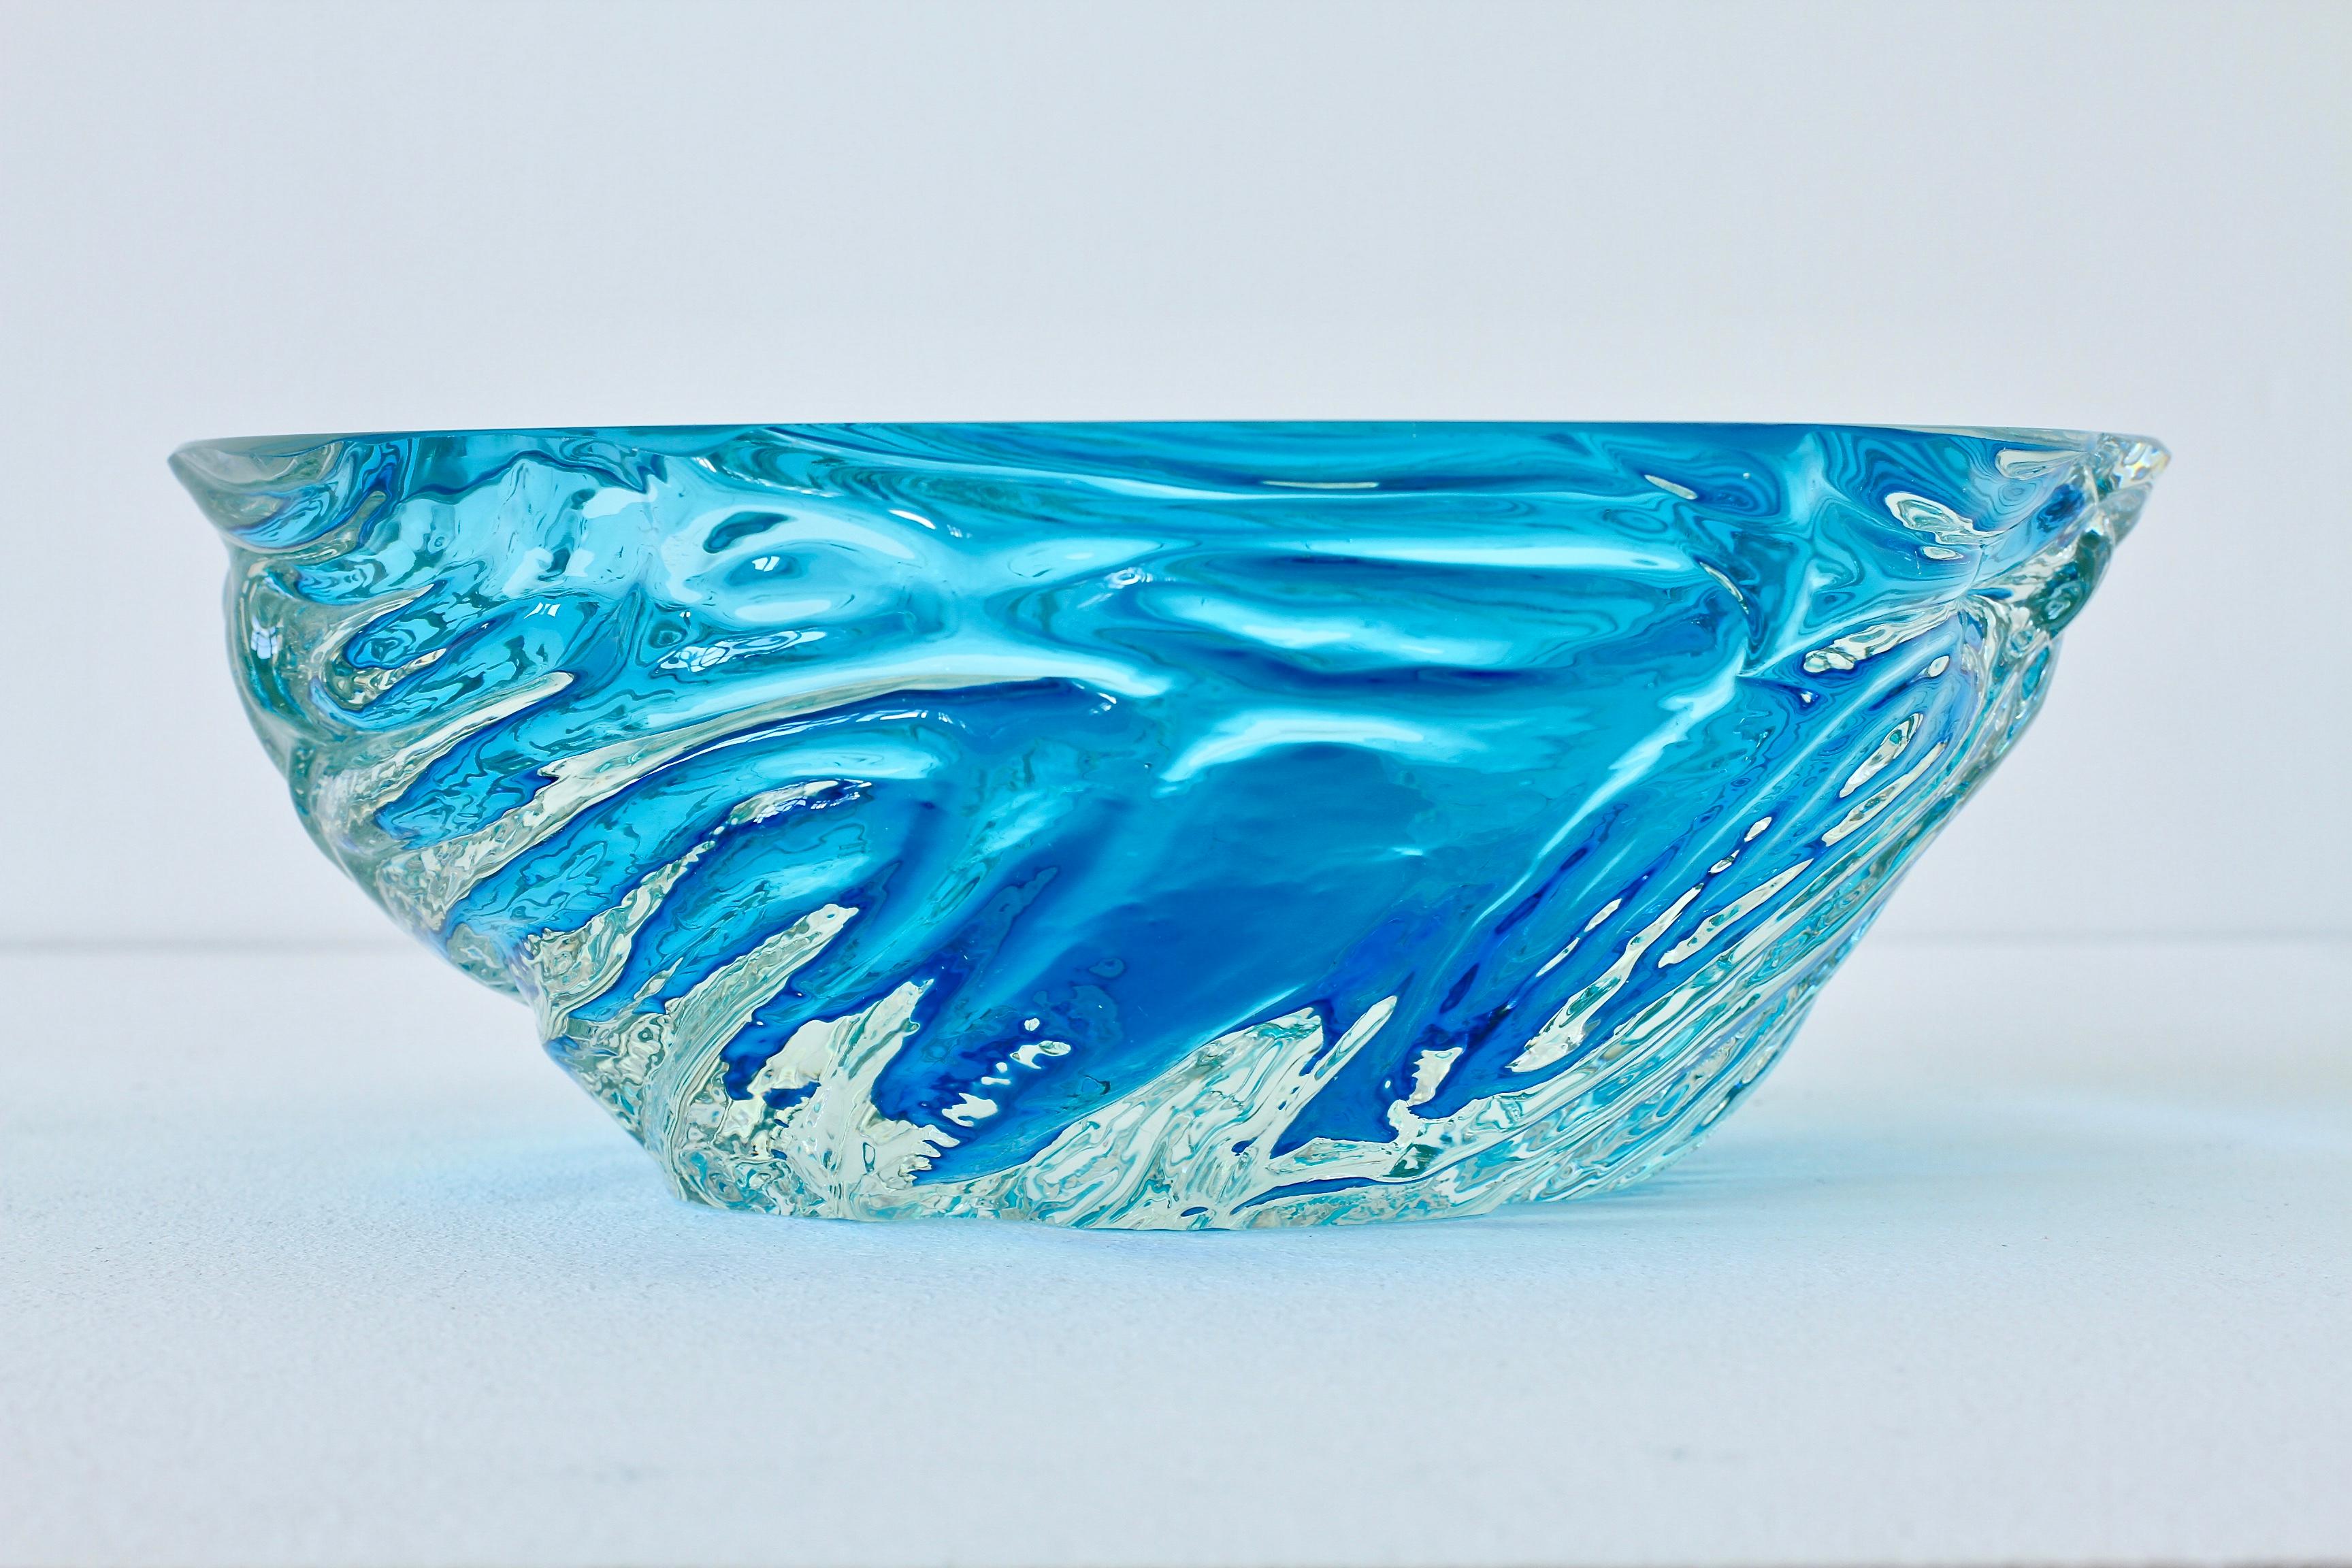 Large, heavy vintage Mid-Century Modern textured Italian glass bowl or dish attributed to Maurizio Arabella for Seguso Vetri d'Arte Murano, Italy, circa late 1970s / early 1980s. Elegant in form and showing extraordinary craftmanship with the use of